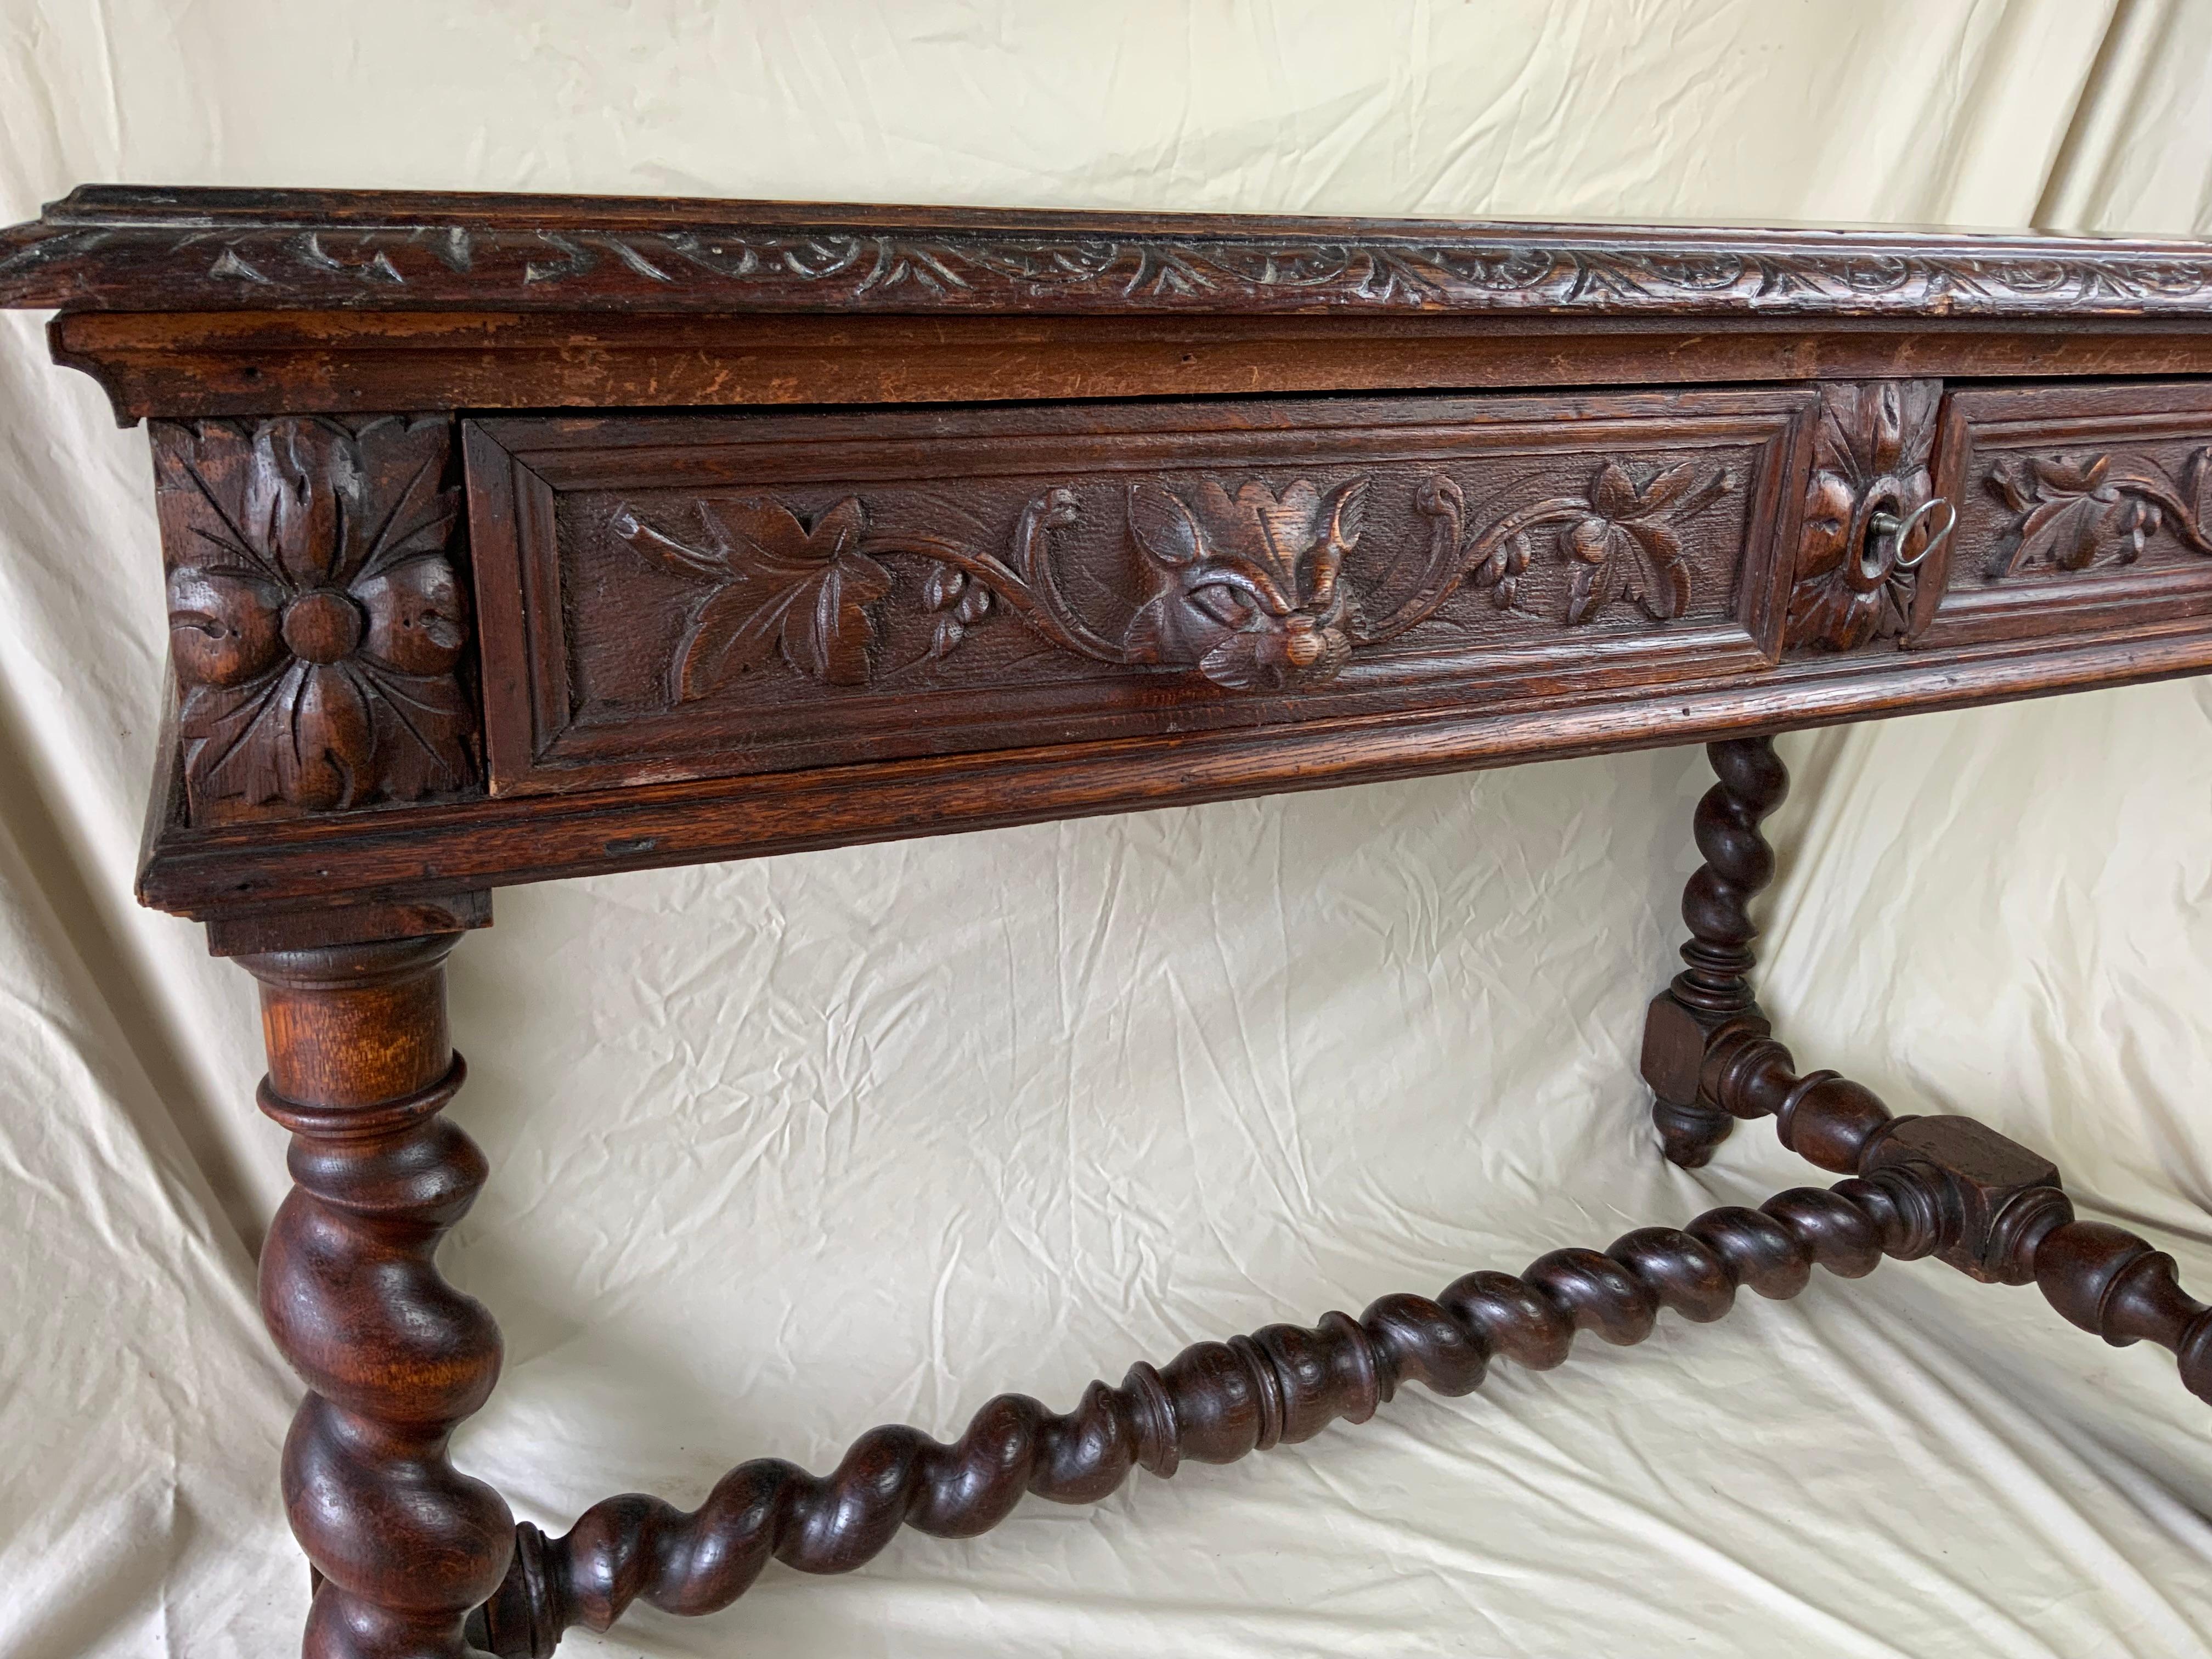 Antique French Desk or library Table Renaissance Revival last quarter 19th century.  Heavy Barley Twist legs and middle stretcher.  Two drawers with carved heads and the original center drawer lock and working key. Original surface with a finely age